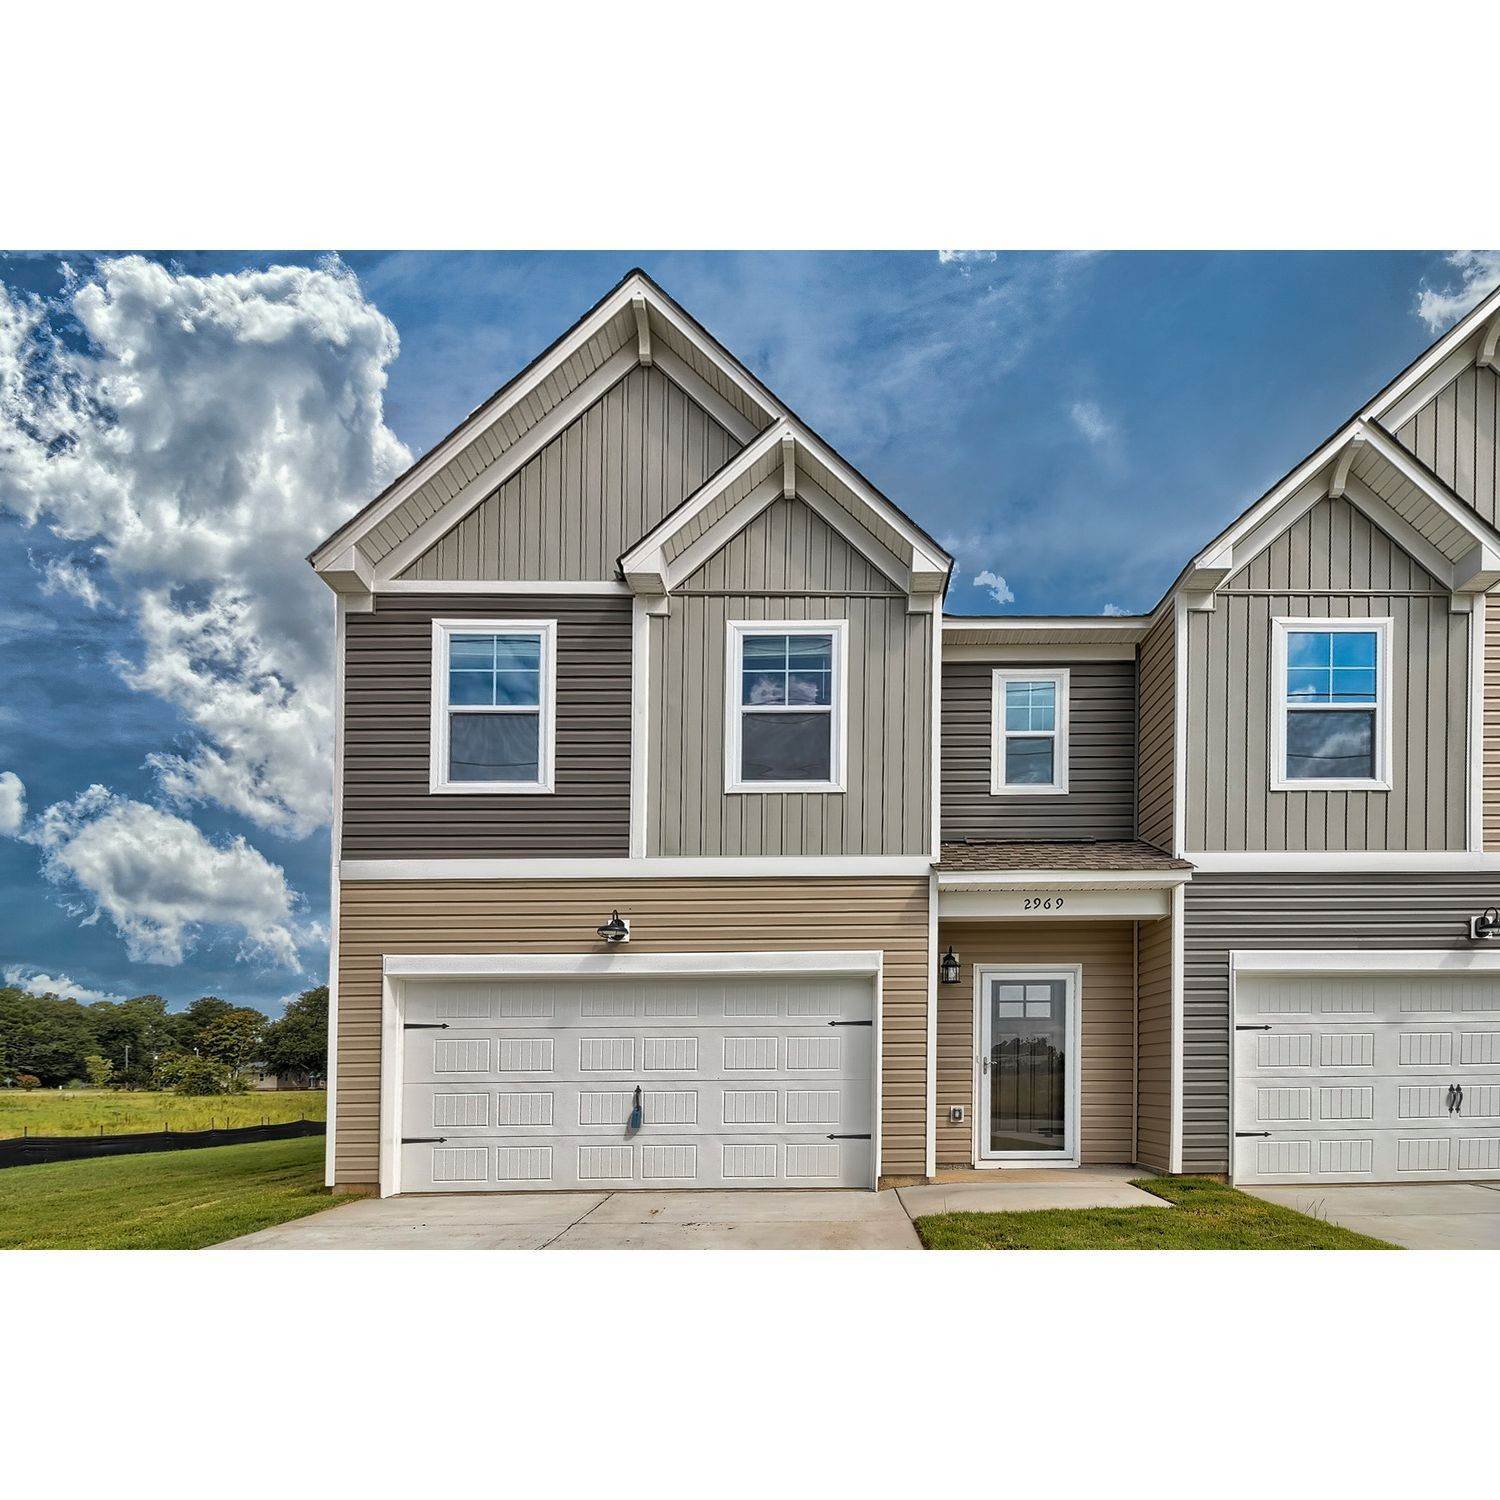 Townhomes at Pocalla Springs bâtiment à 1788 Snead Drive, Sumter, SC 29154